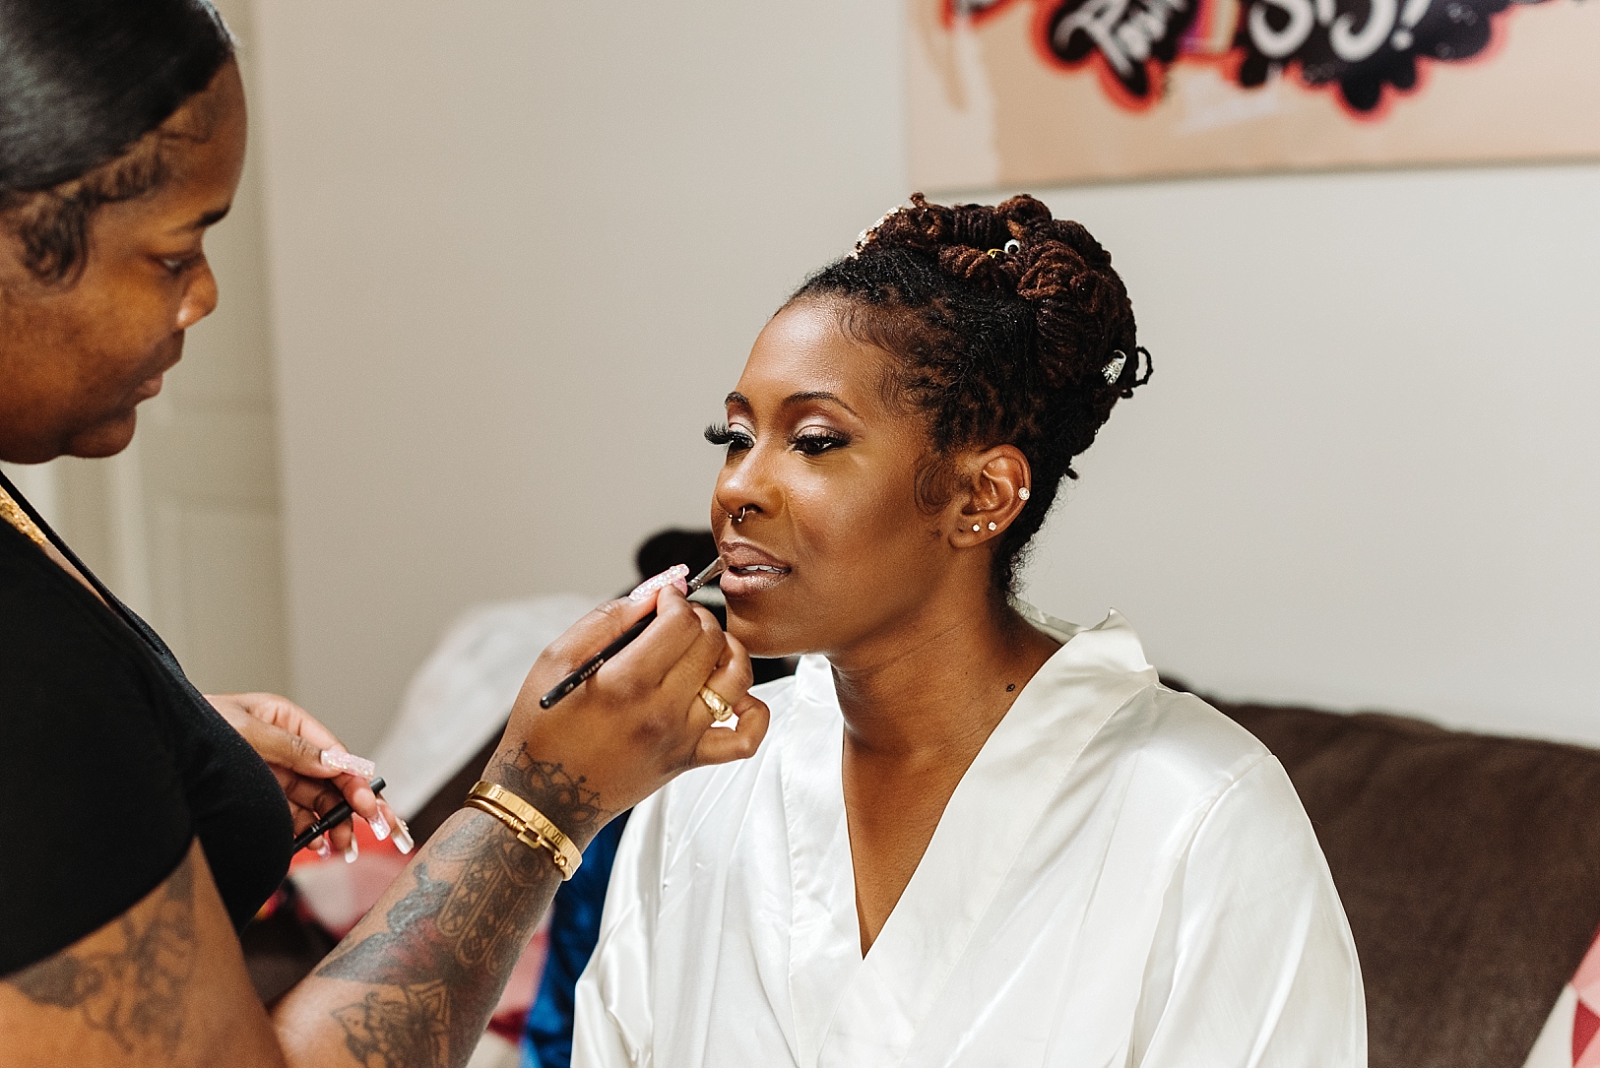 bride gets ready in her home makeup artist